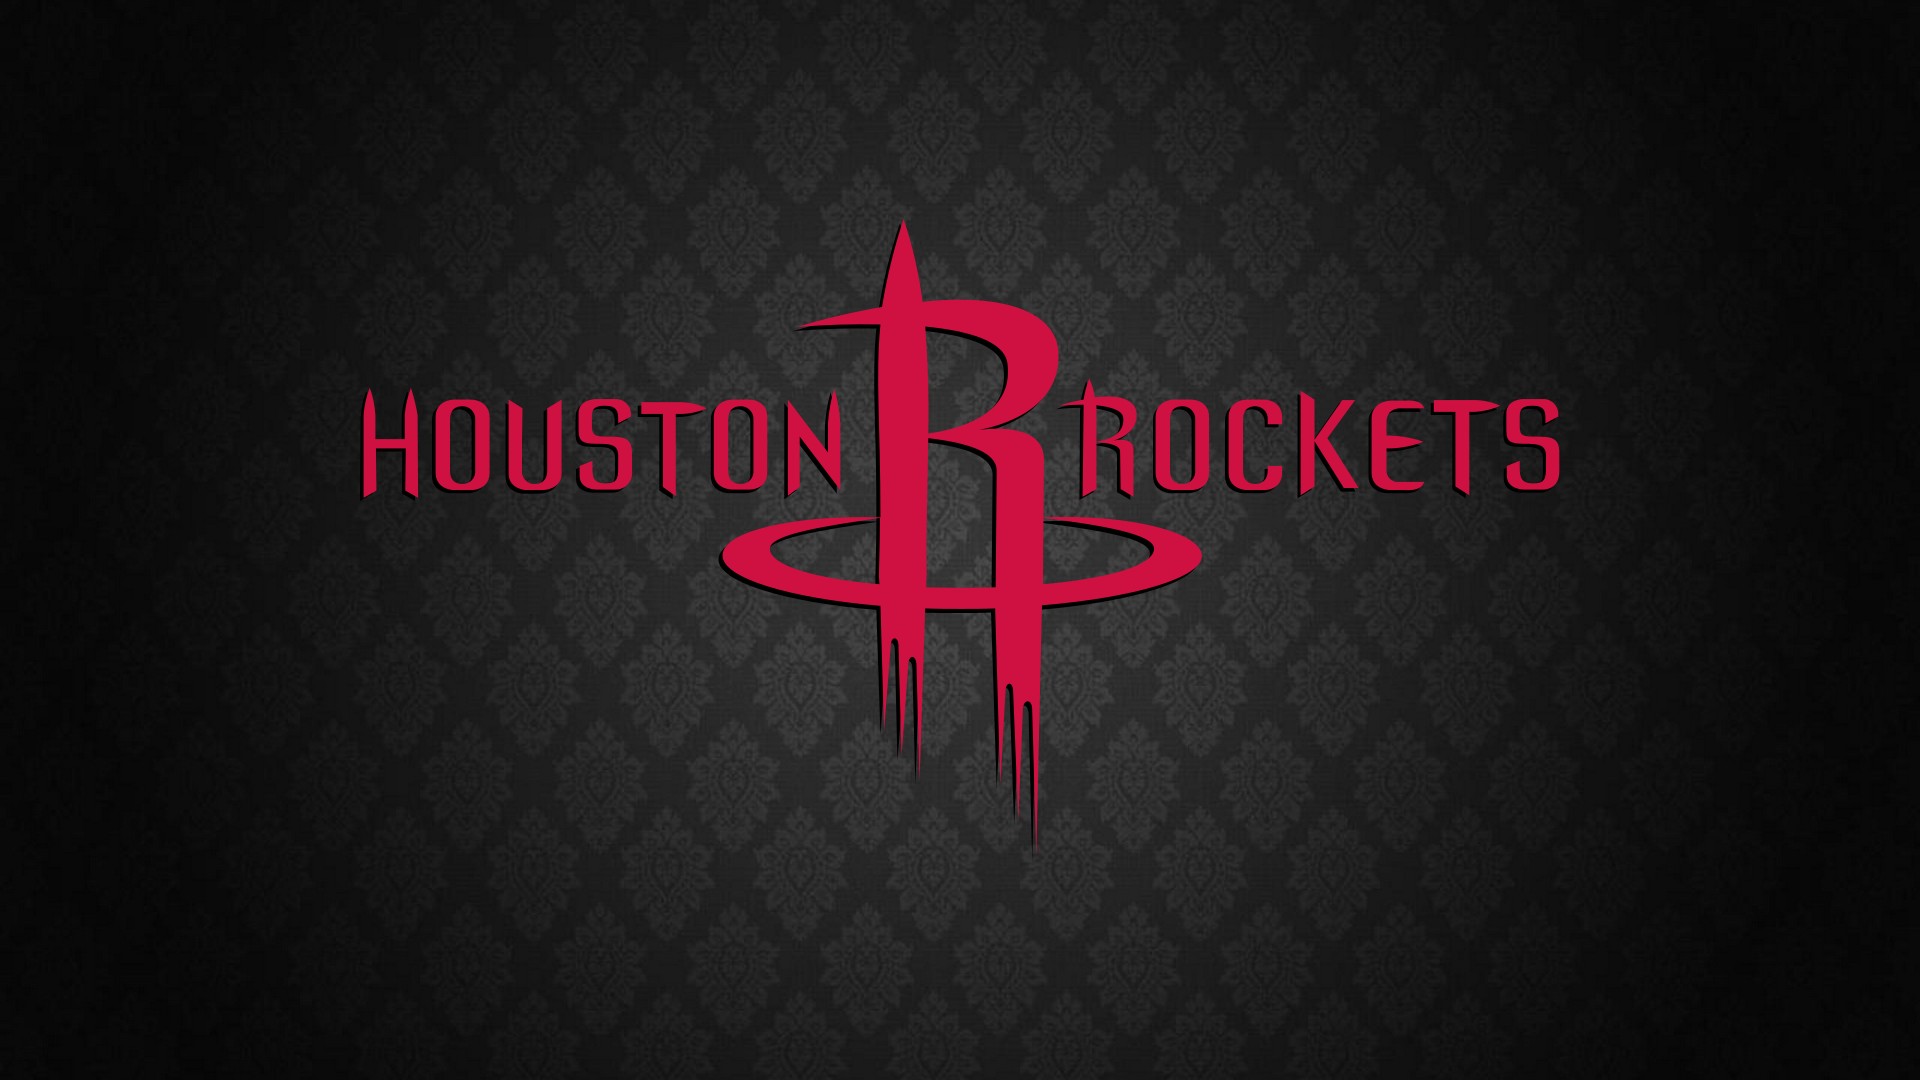 HD Houston Basketball Wallpapers with image dimensions 1920x1080 pixel. You can make this wallpaper for your Desktop Computer Backgrounds, Windows or Mac Screensavers, iPhone Lock screen, Tablet or Android and another Mobile Phone device